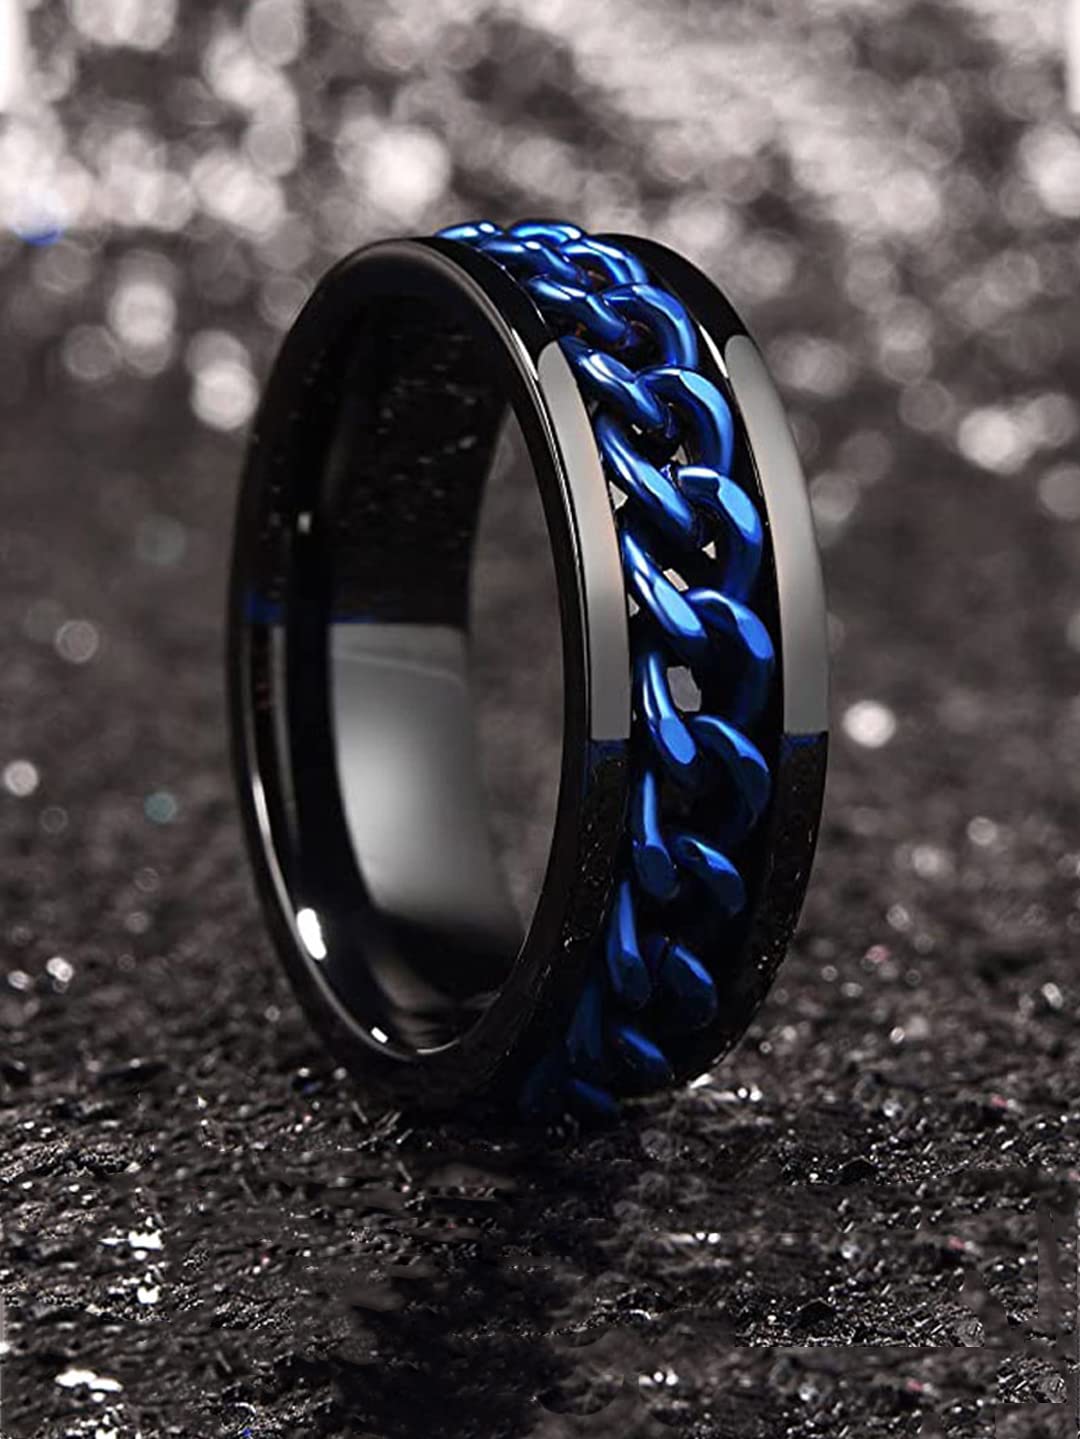 Yellow Chimes Rings for Men Black and Blue Colored Stainless Steel Band Designed Rings for Men and Boys